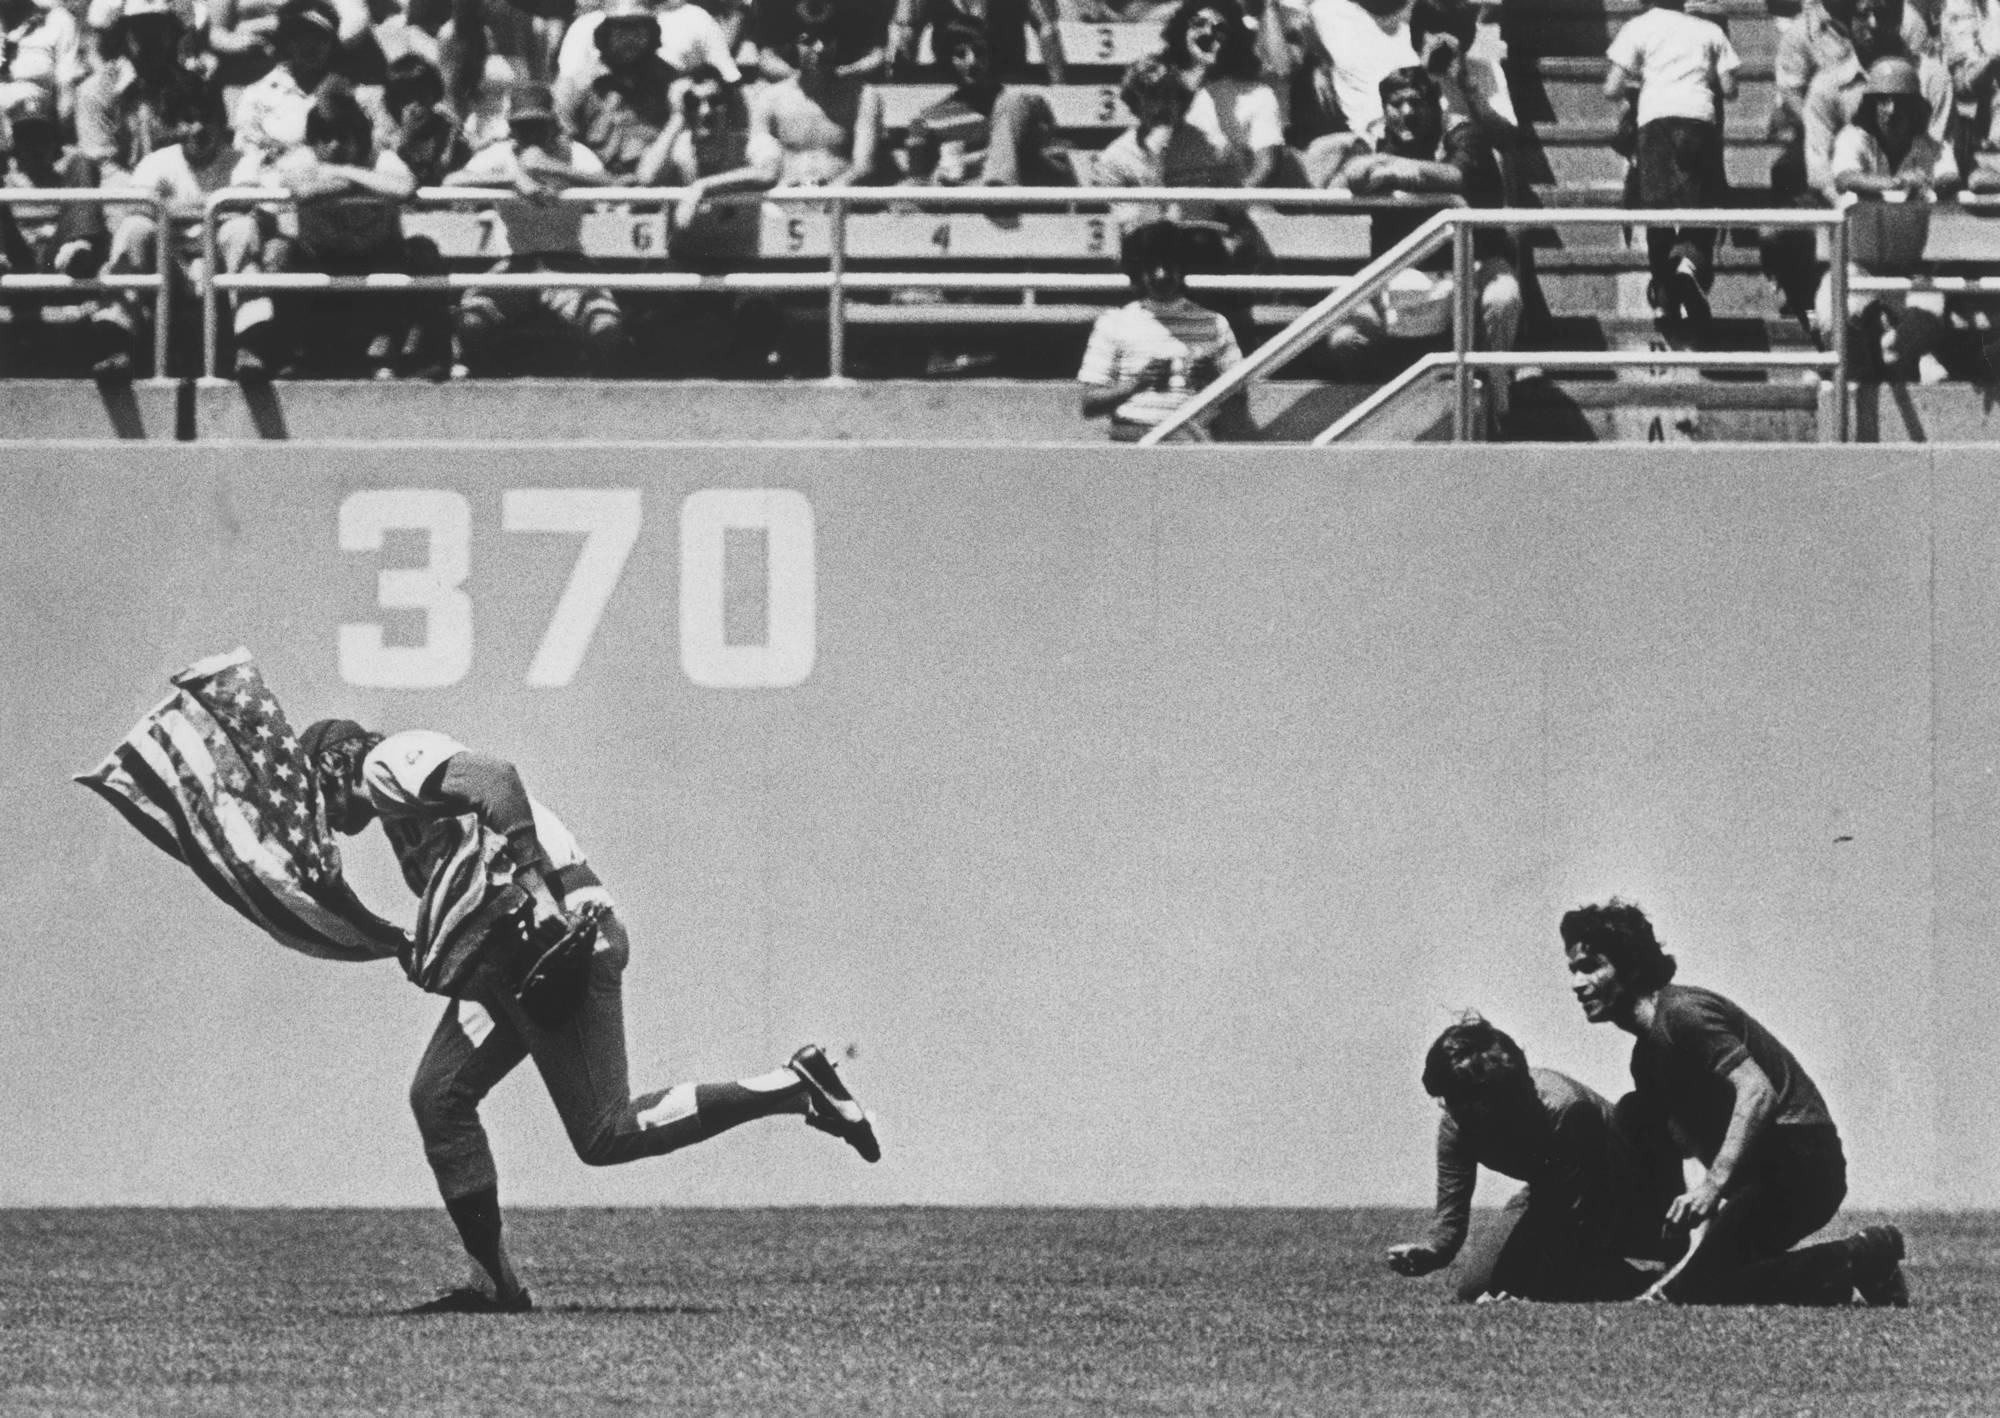 Chicago Cubs centerfielder Rick Monday, saving the American flag from being burned by protesters.